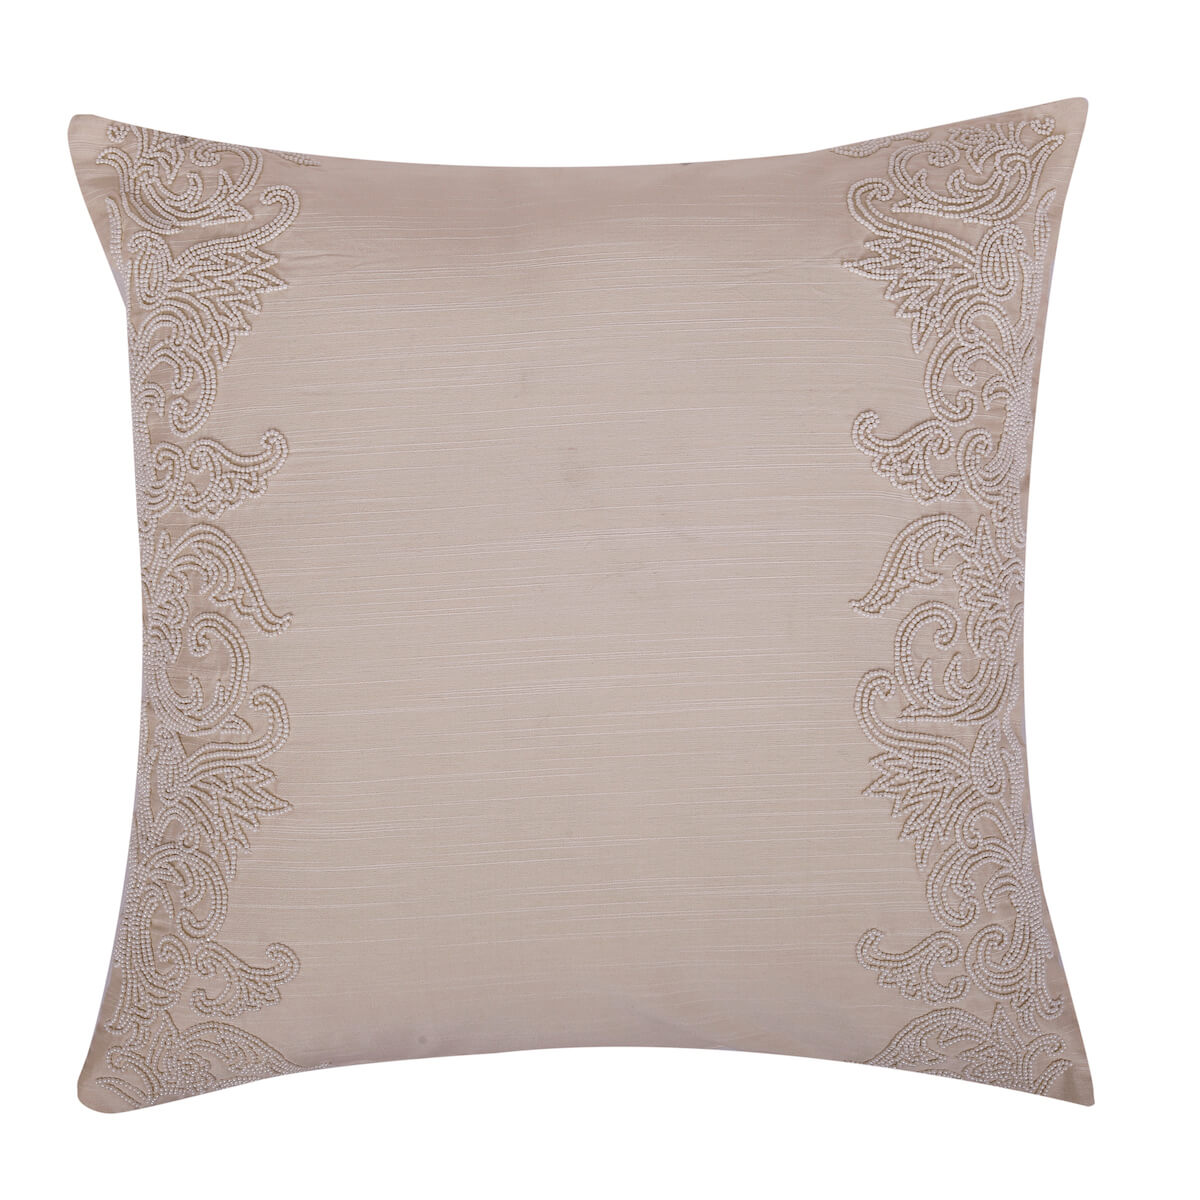 White Pearl Hand Embroidered Contemporary Dupion Silk Cream Cushion Cover Size 16"x16"